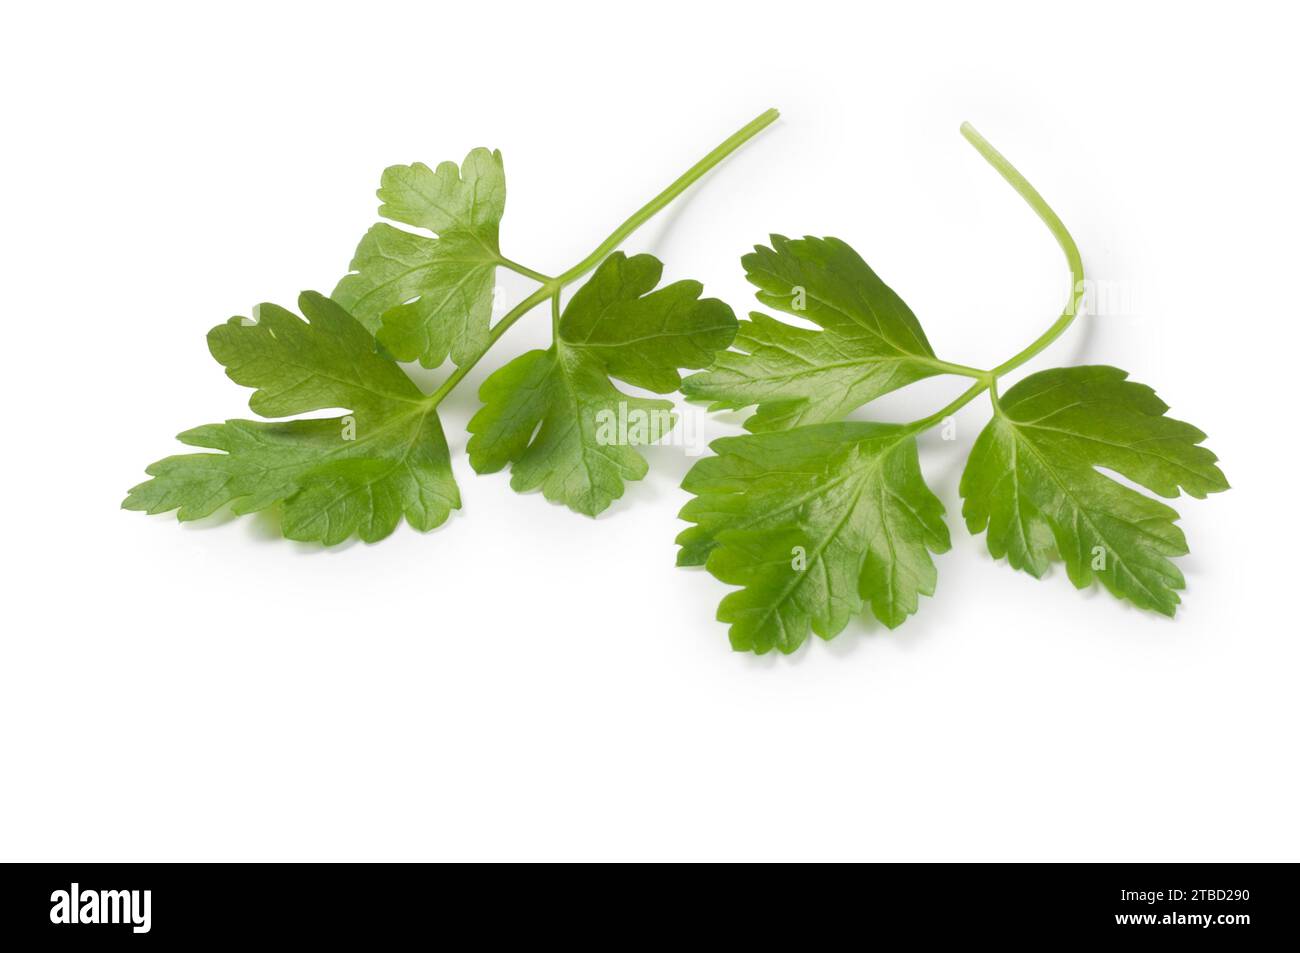 Studio shot of parsley leaf cut out against a white background Stock Photo